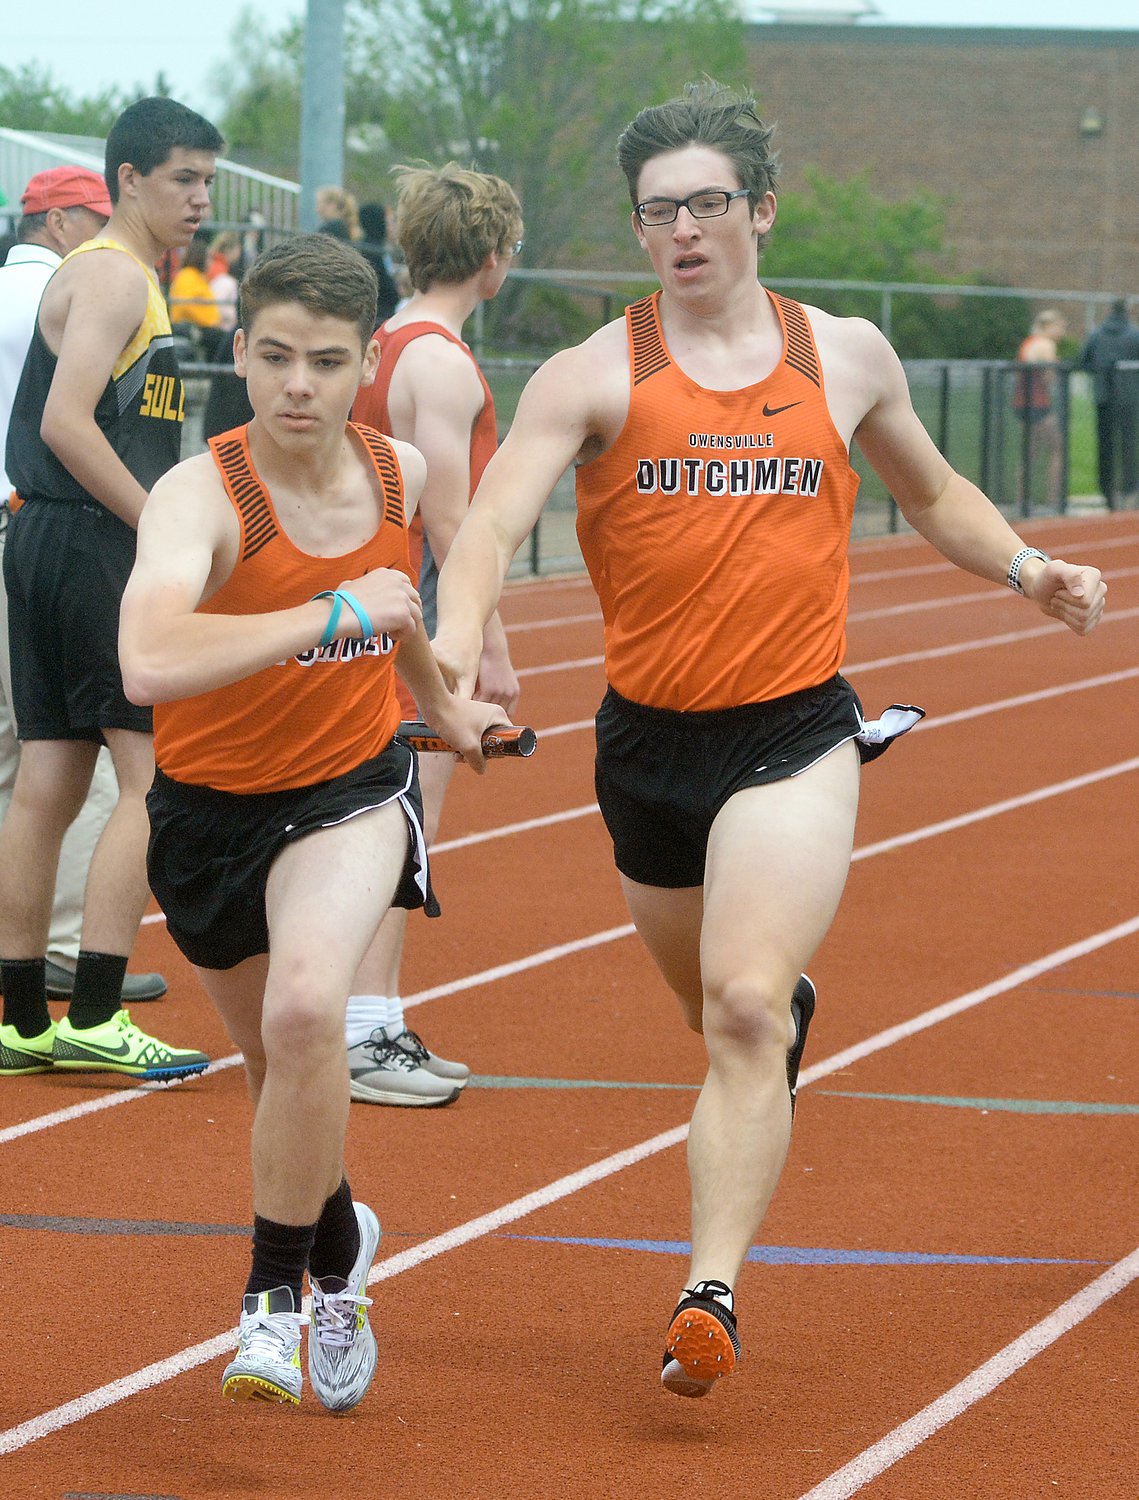 Hunter Lang (far left) reaches back for the baton from Noah Holtmeyer during the JV boys 4x800-meter relay in which the Dutchmen placed second behind Union.